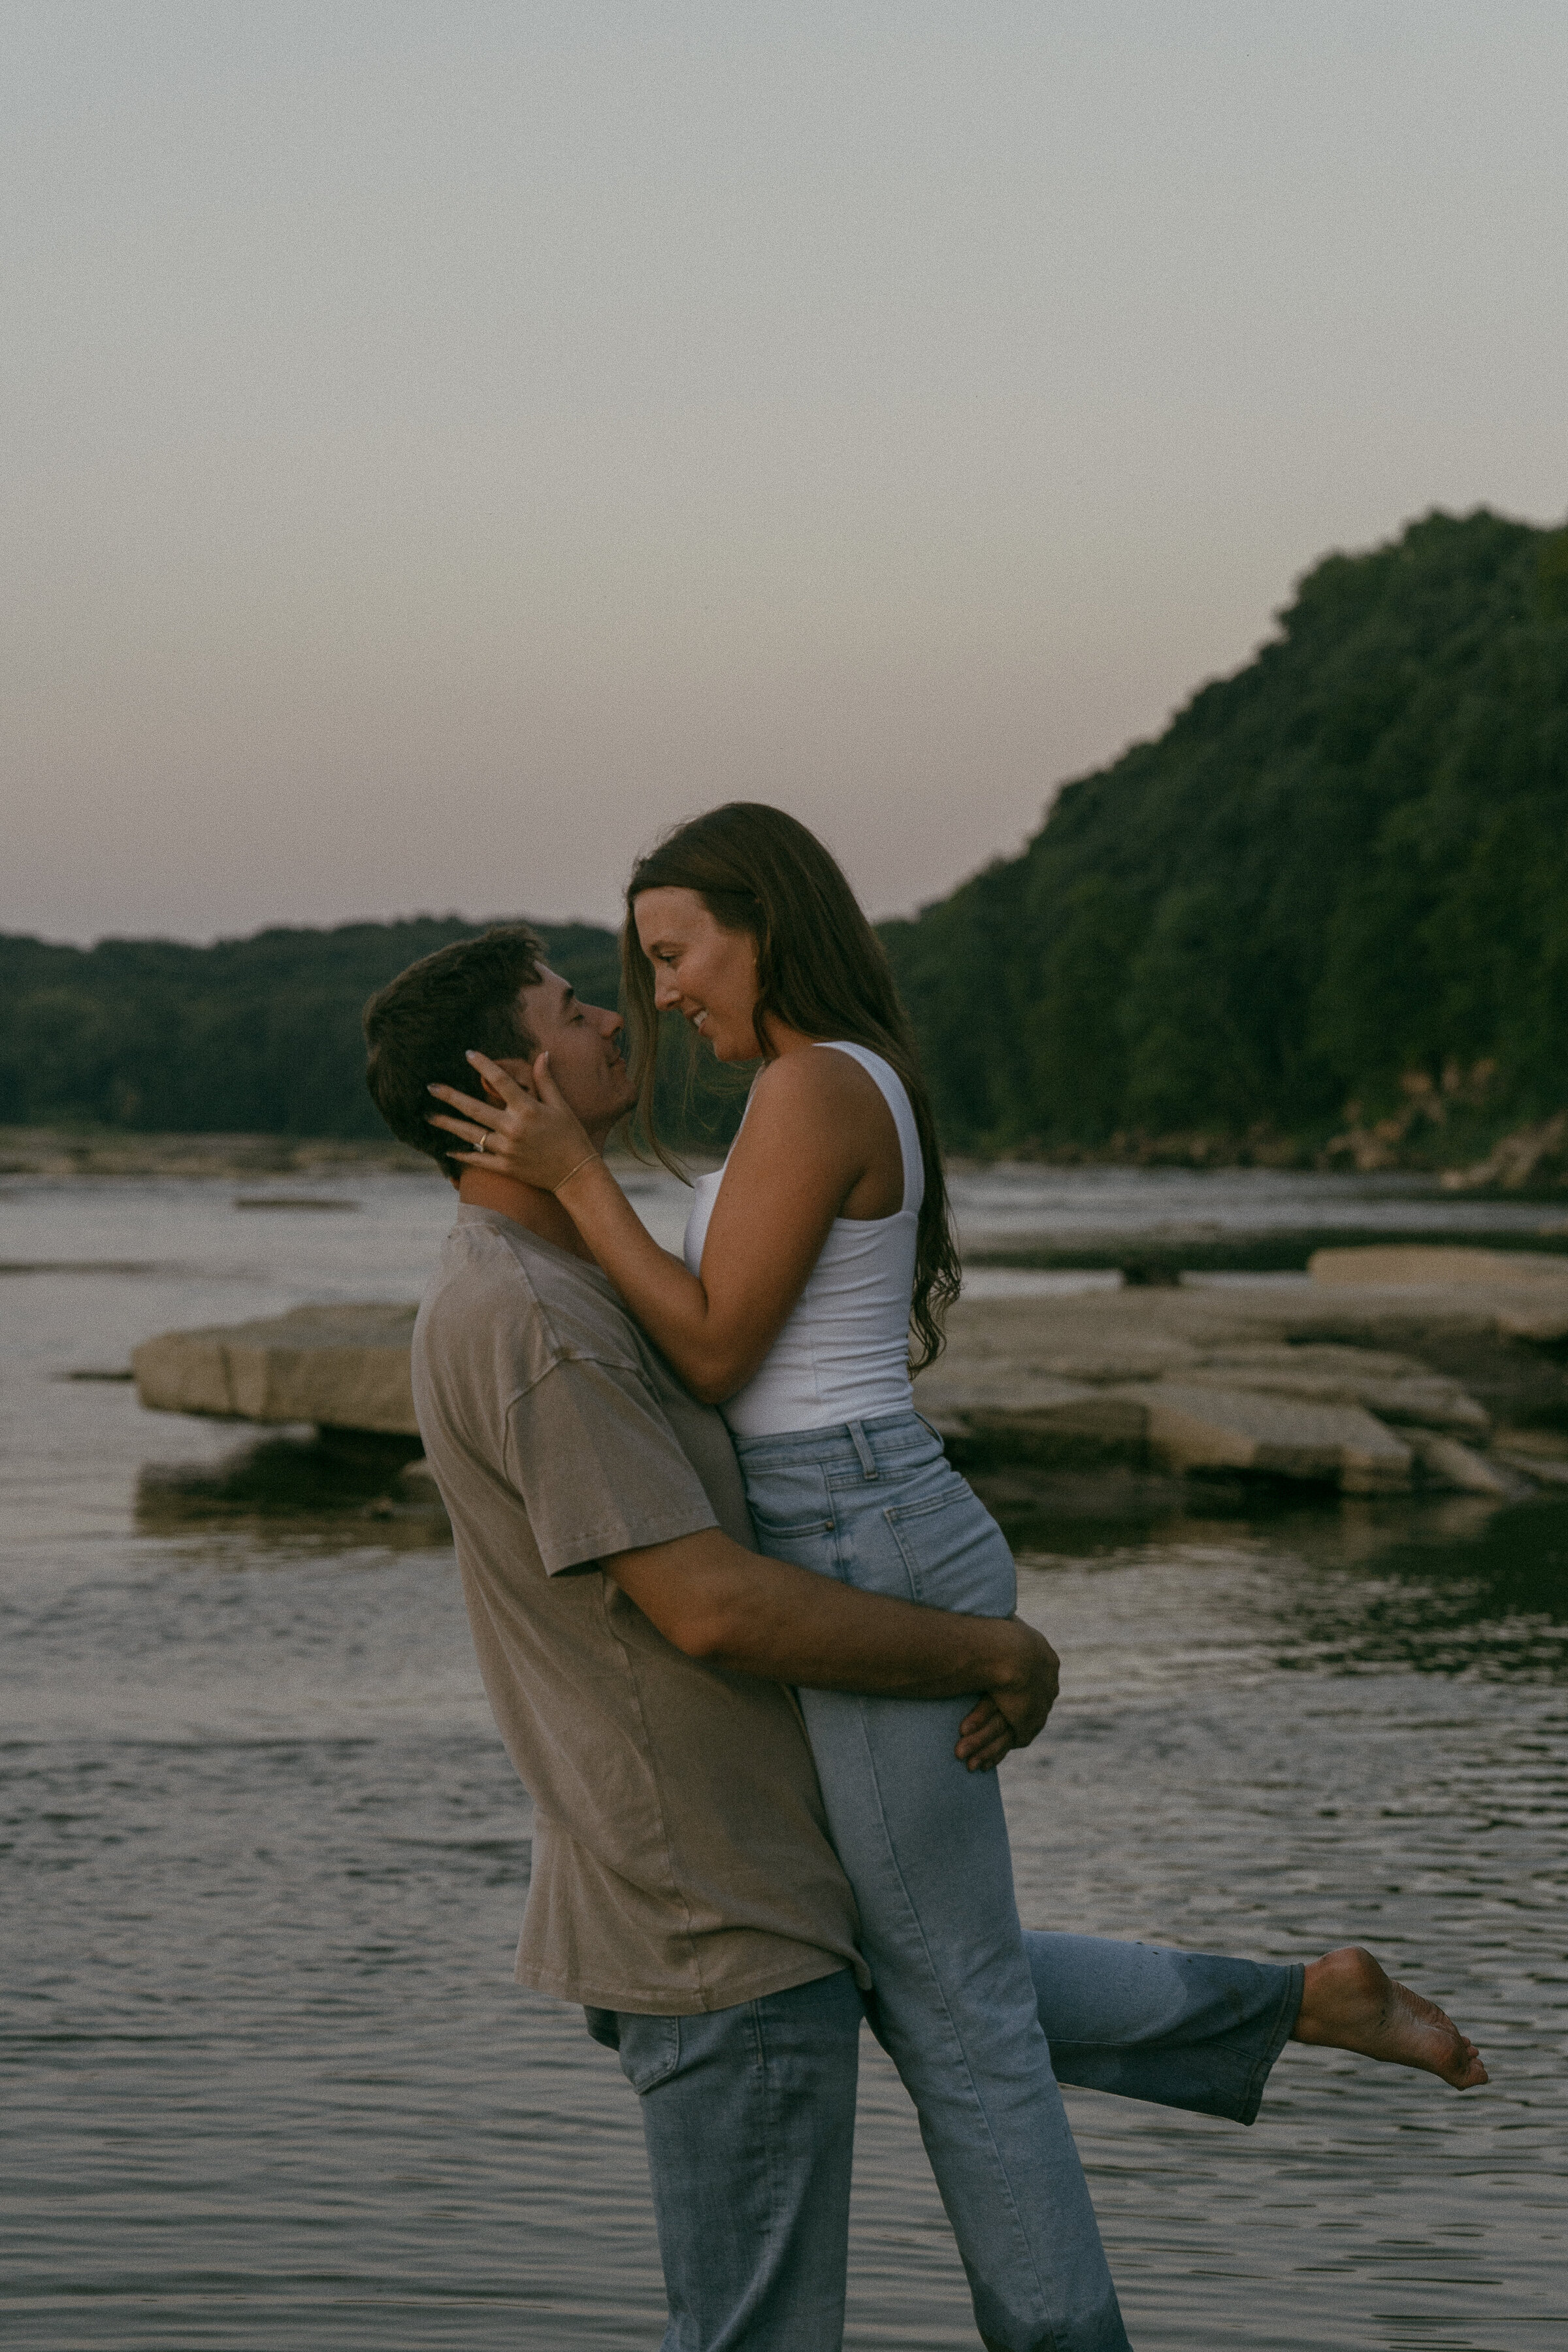 Couple embracing by the river at dusk.